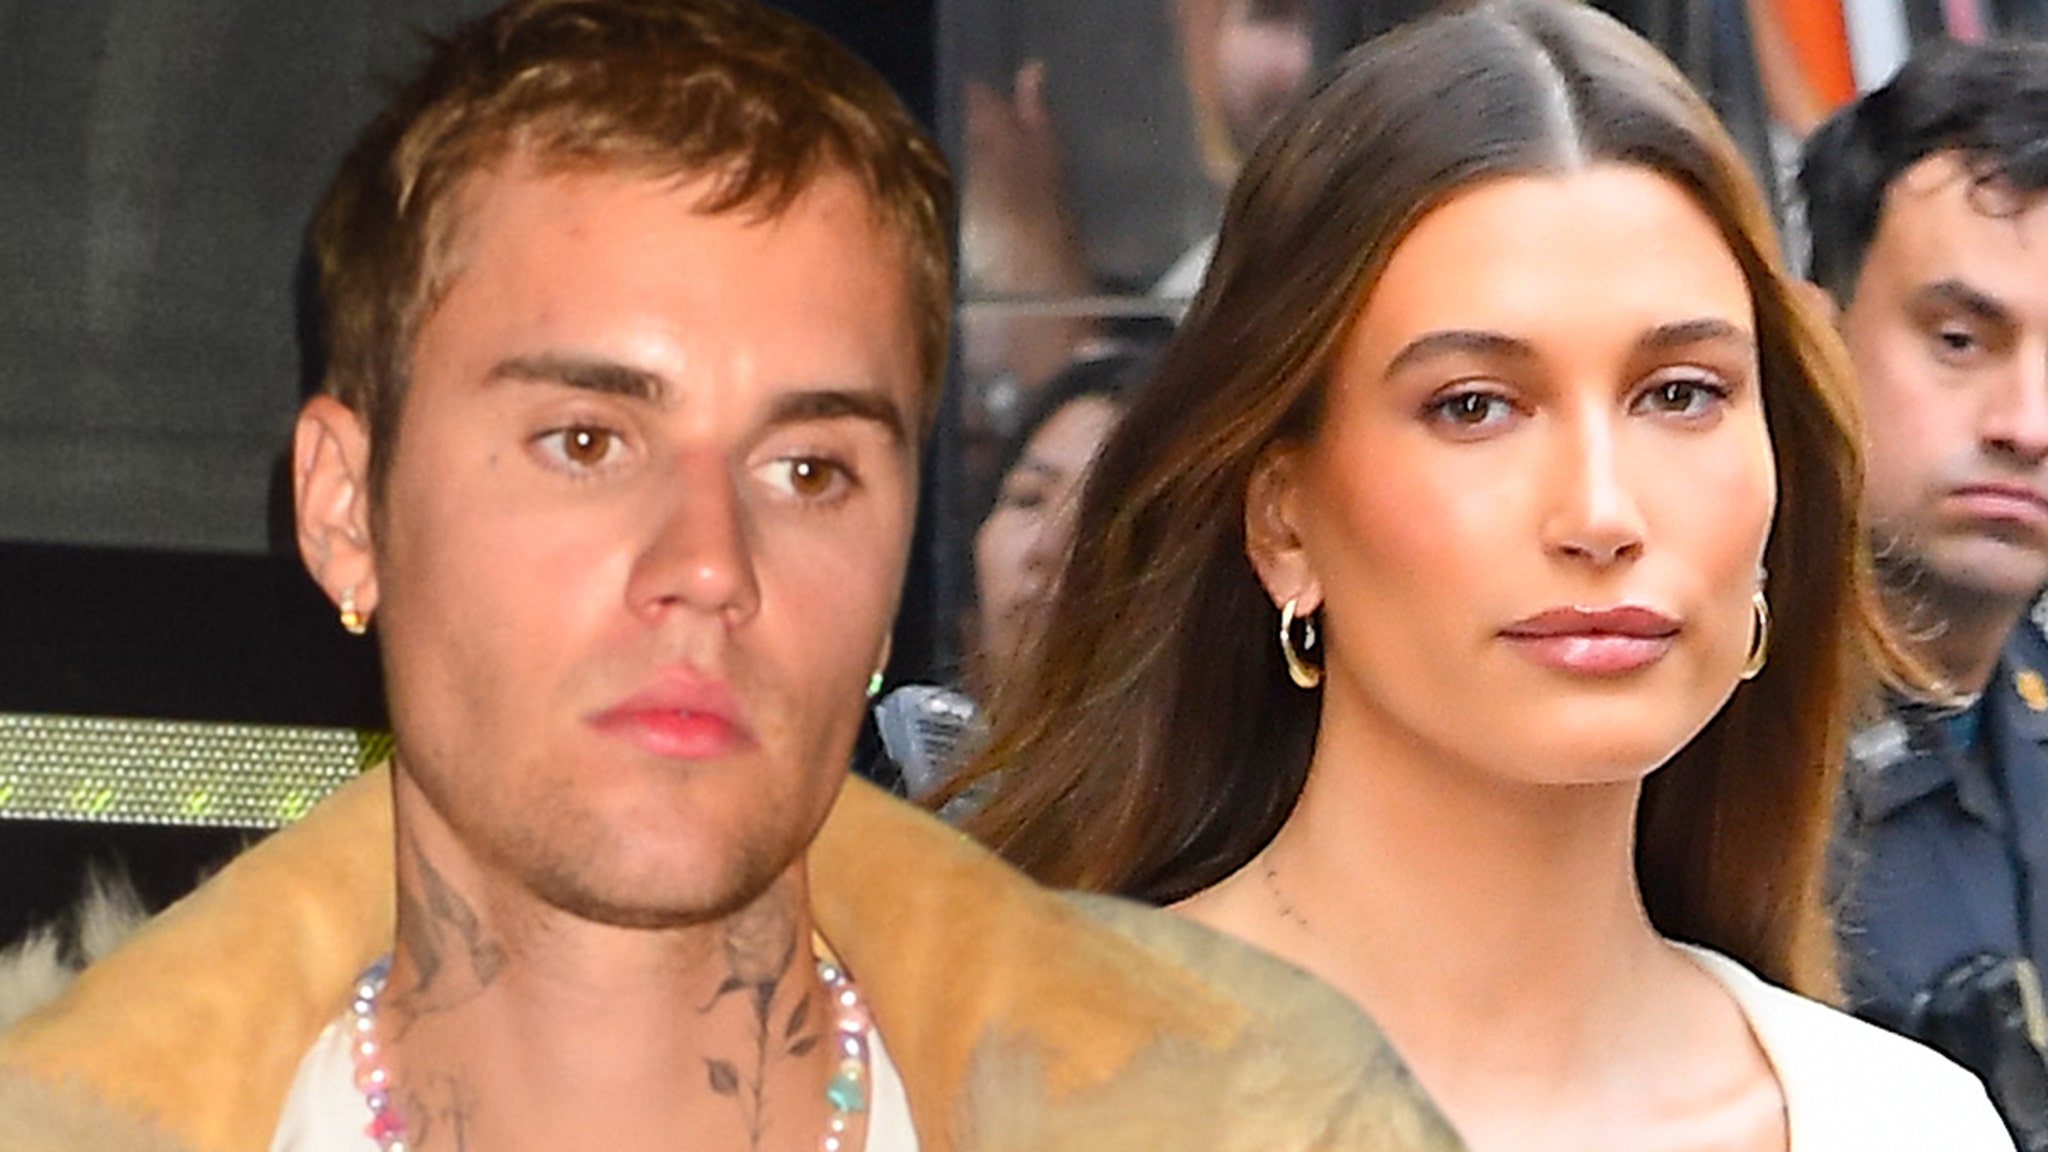 Justin And Hailey Bieber’s Home Violated by Trespasser